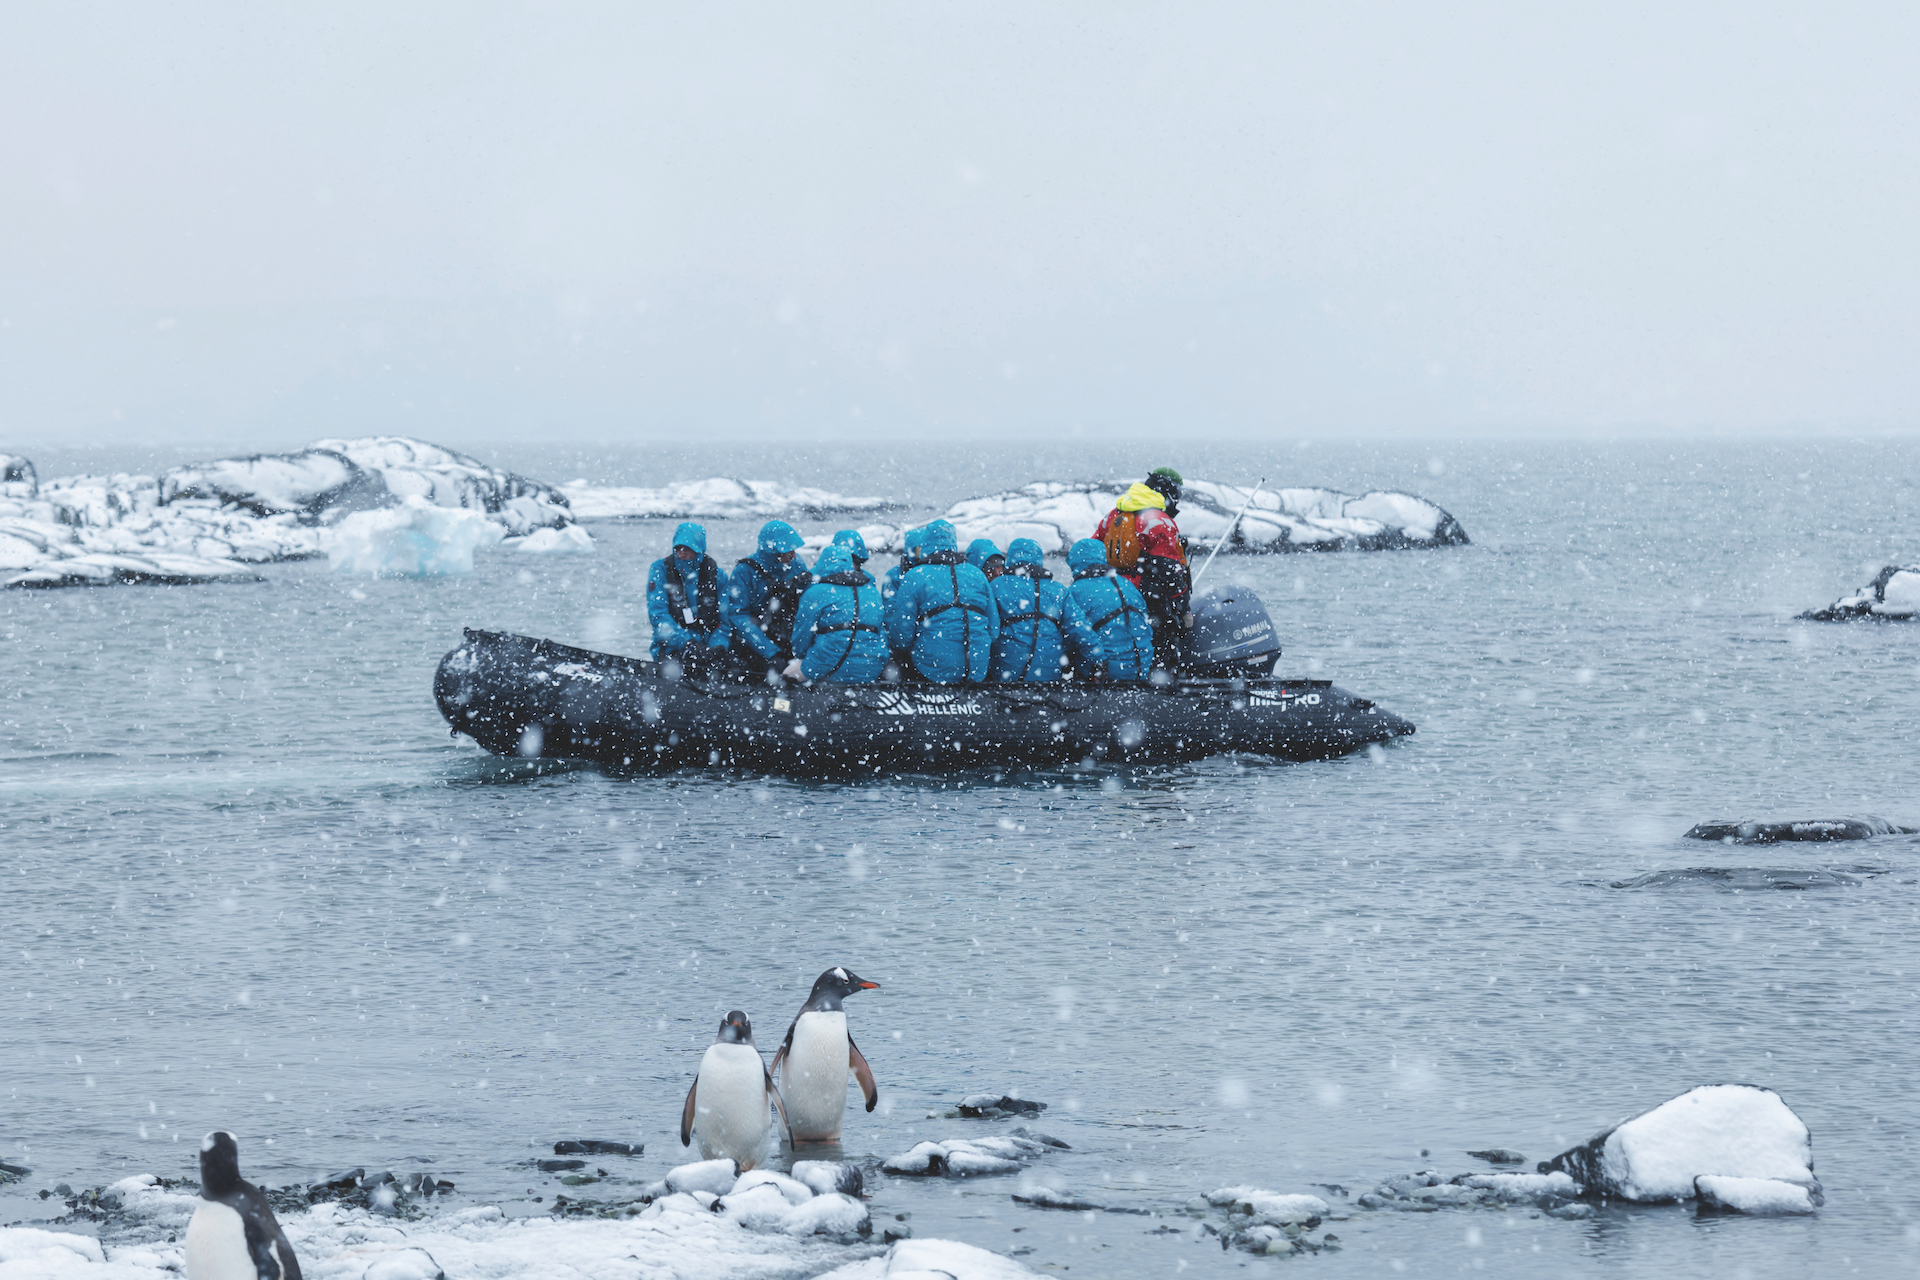 People in a rigid inflatable in Antarctica with penguins in foreground